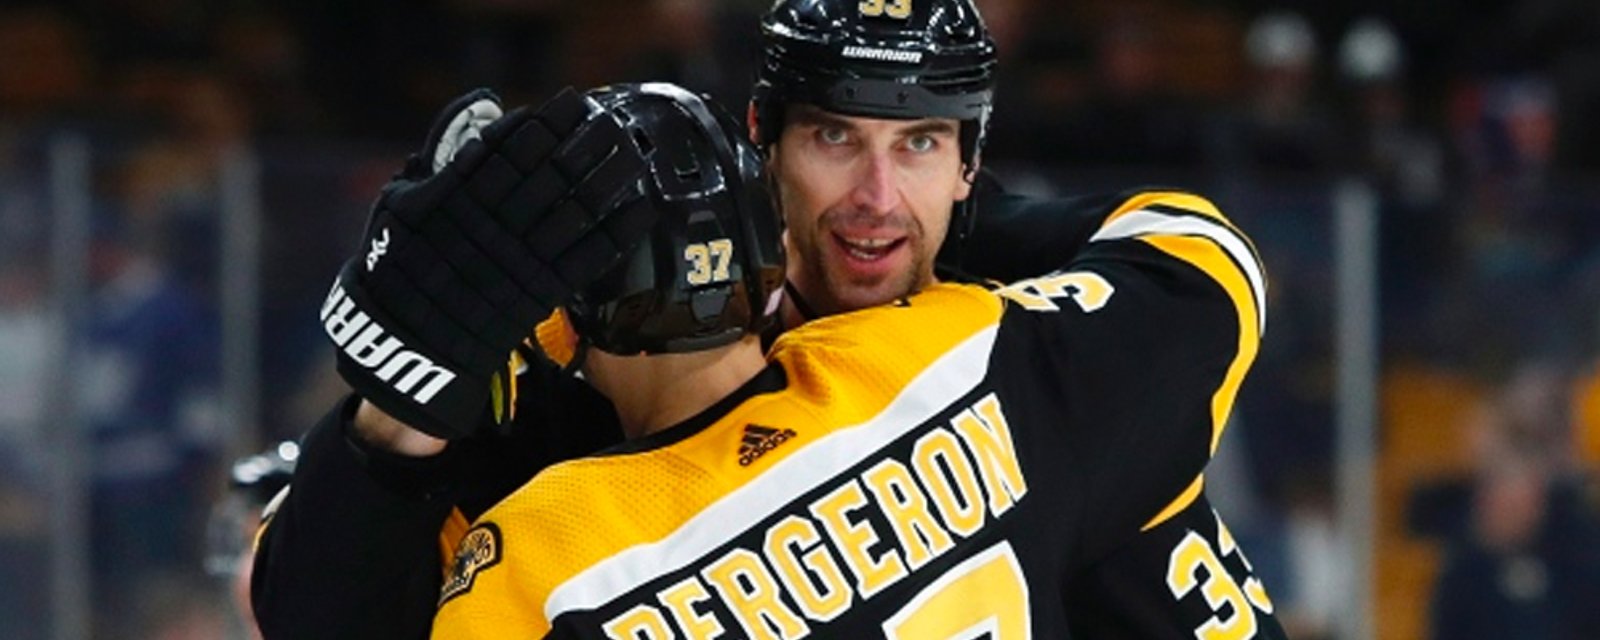 Chara personally anoints Bergeron as the Bruins’ next captain